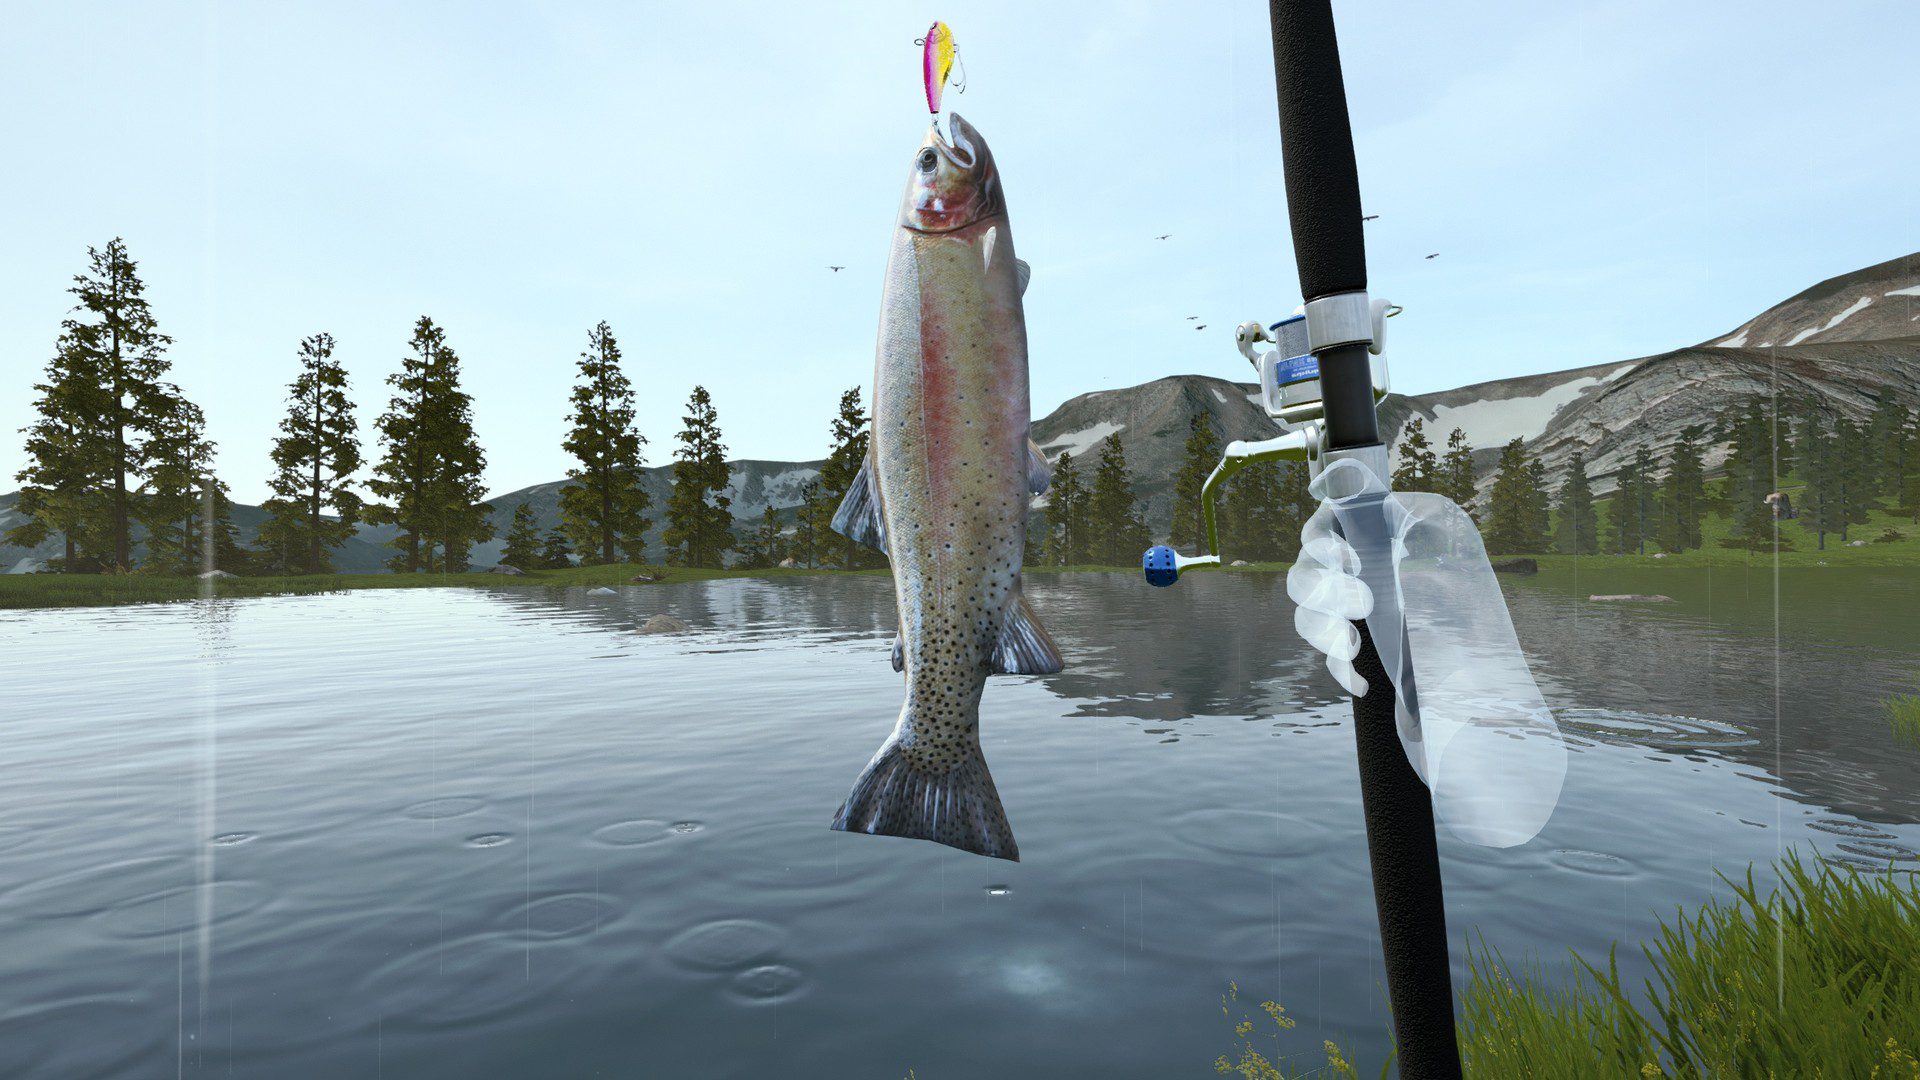 Ultimate Fishing Simulator gets its hooks into consoles and VR devices